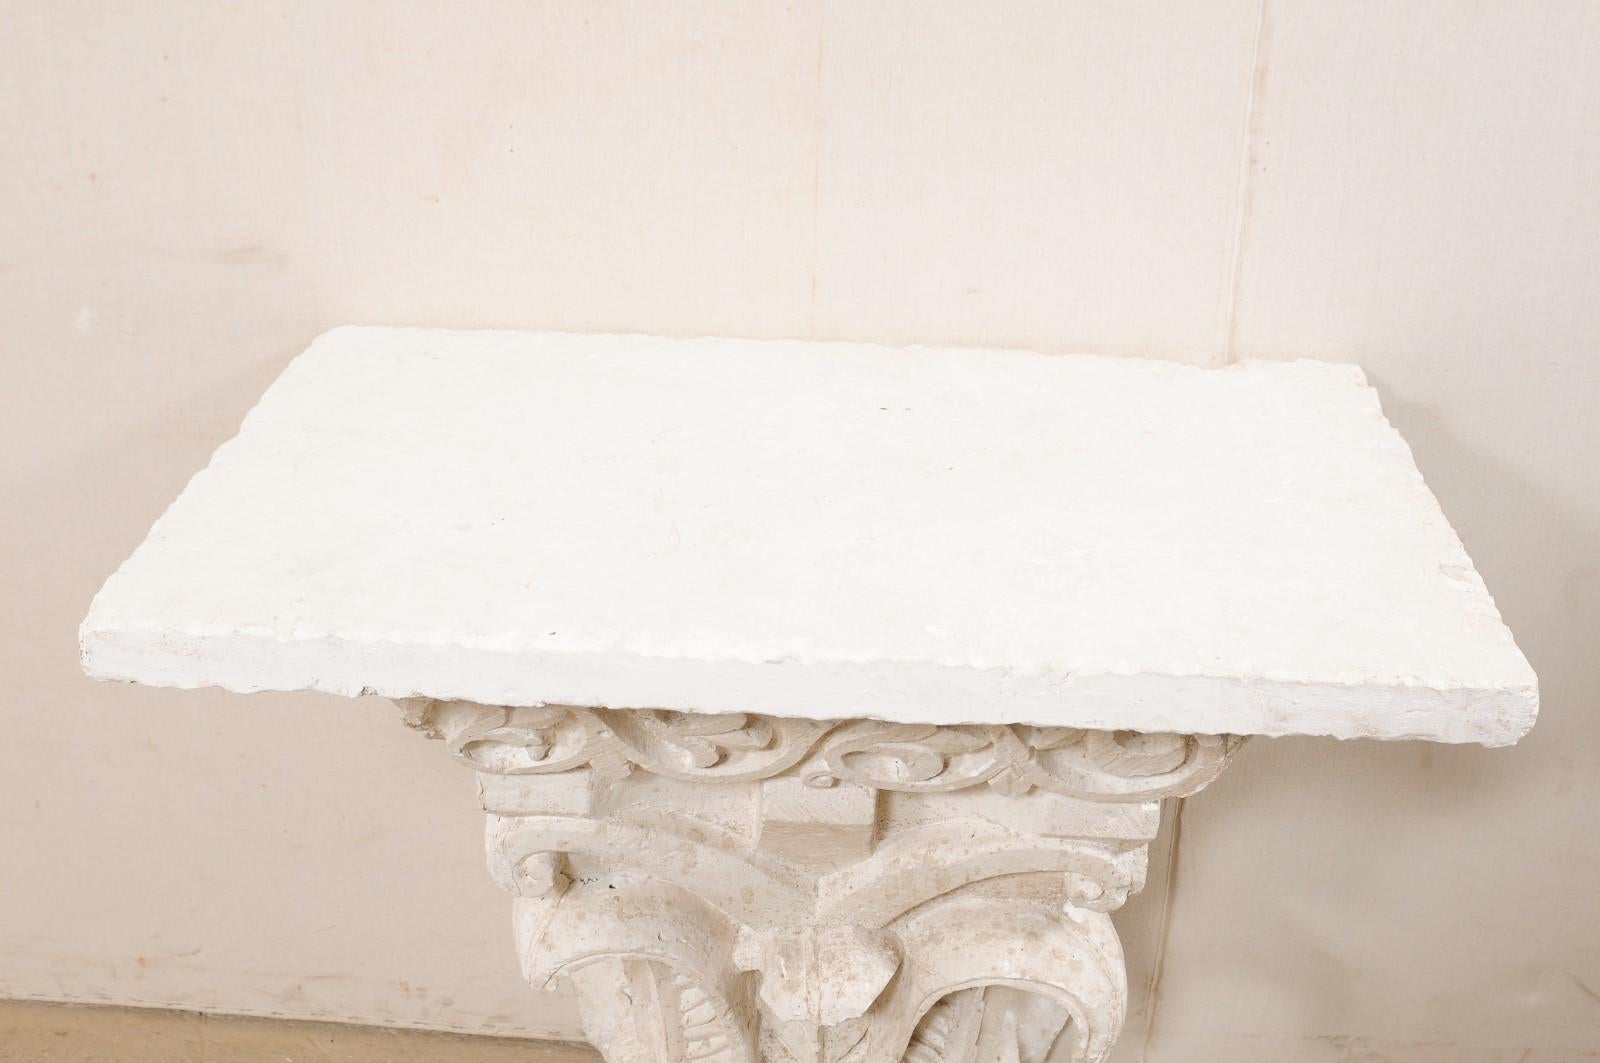 20th Century Spanish Early 20th C. Wall Console Table in White w/New Fossilized Coral Top